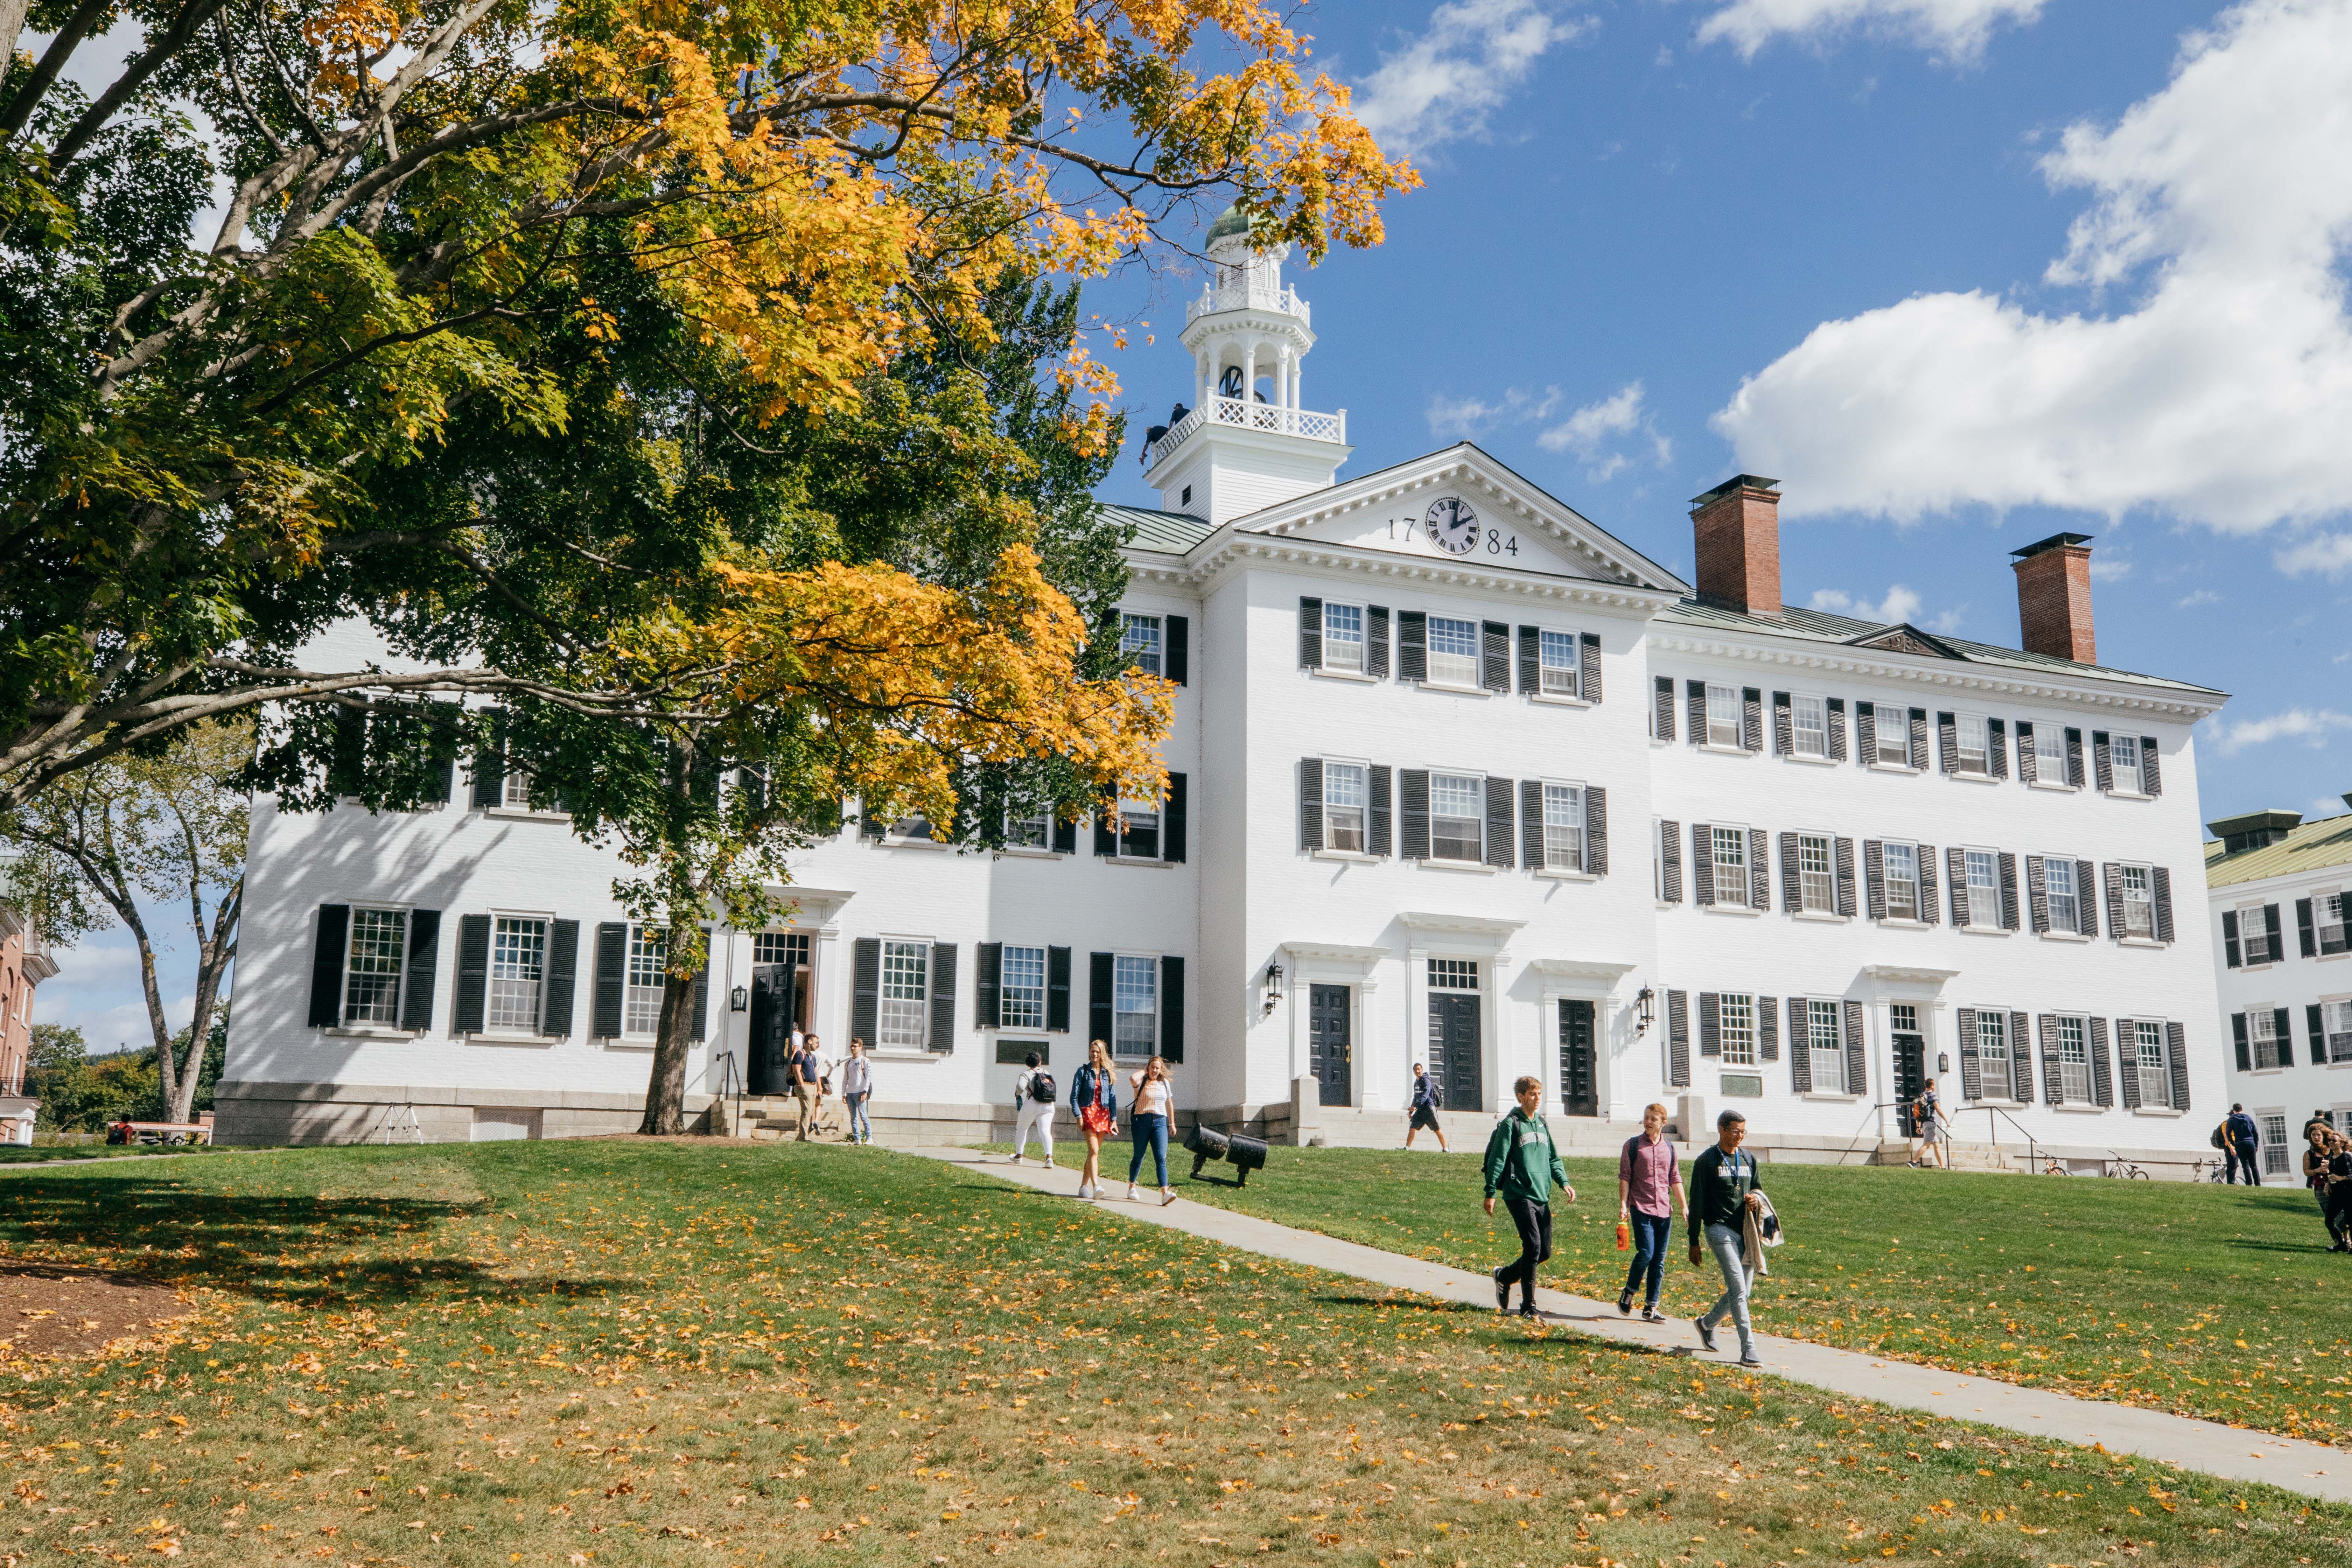 The front of Dartmouth Hall in the fall with students entering and exiting the building